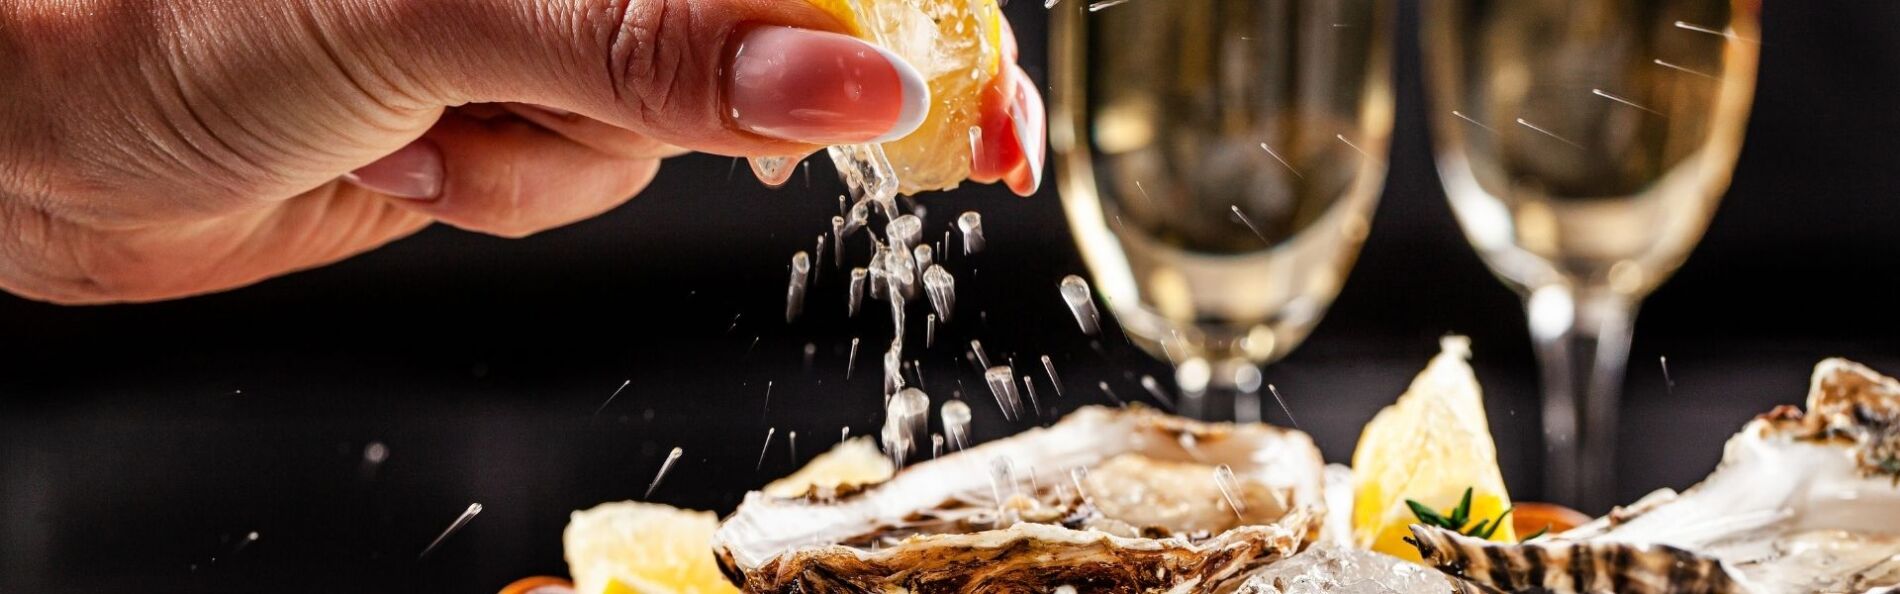 lemon juice being squeezed over fresh oysters